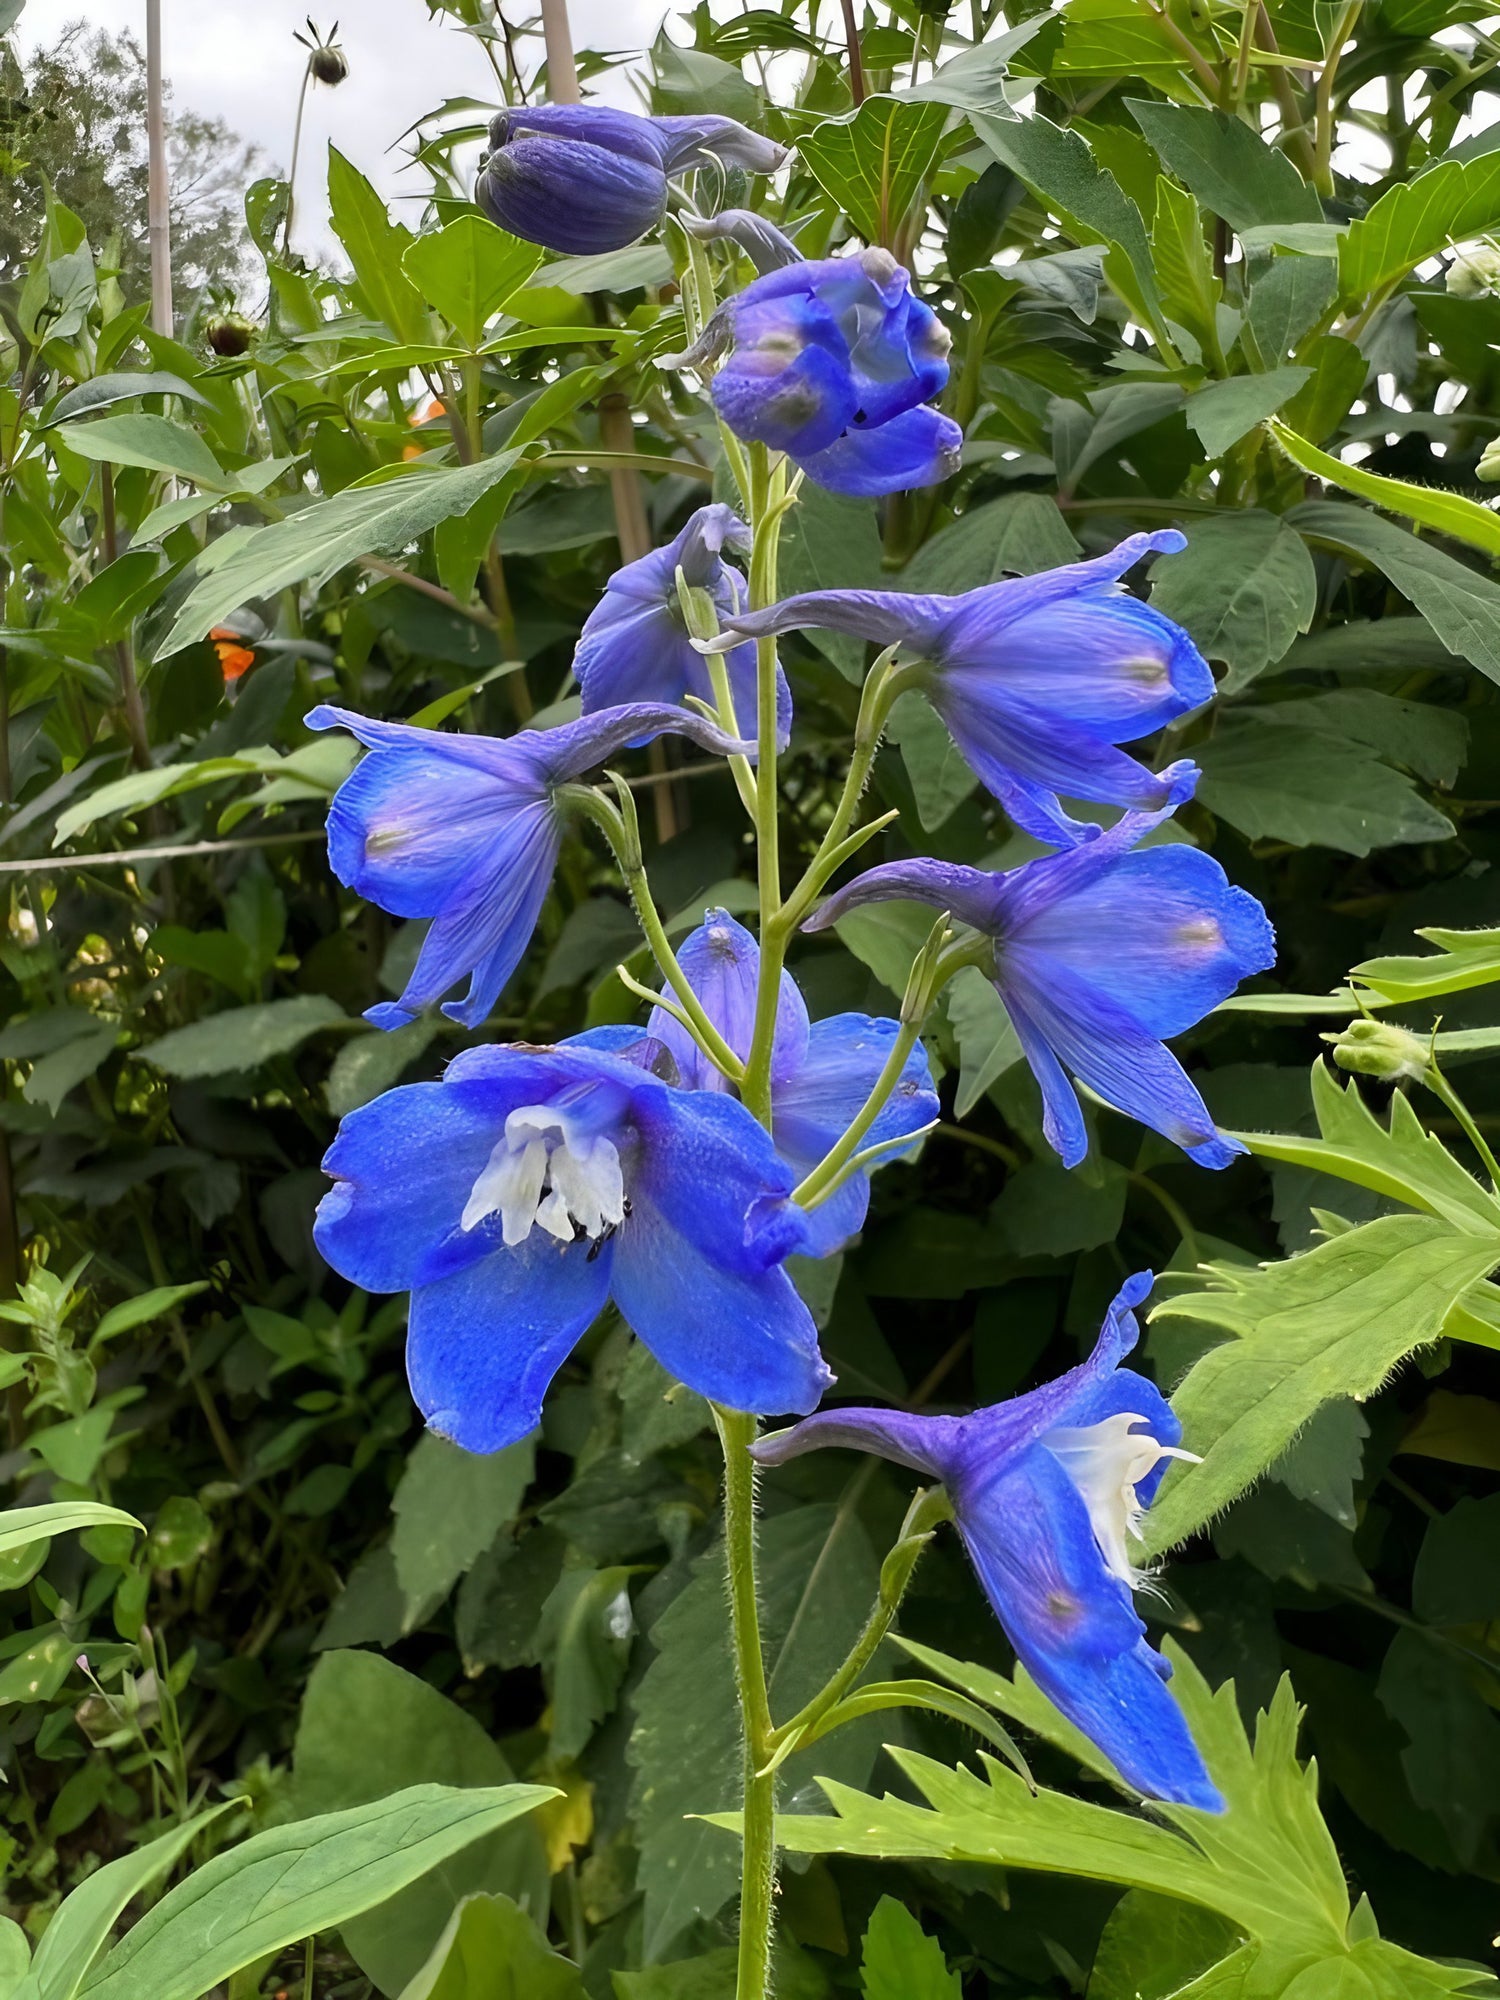 Lush green leaves framing the blue petals of Delphinium Pacific Giant Summer Skies